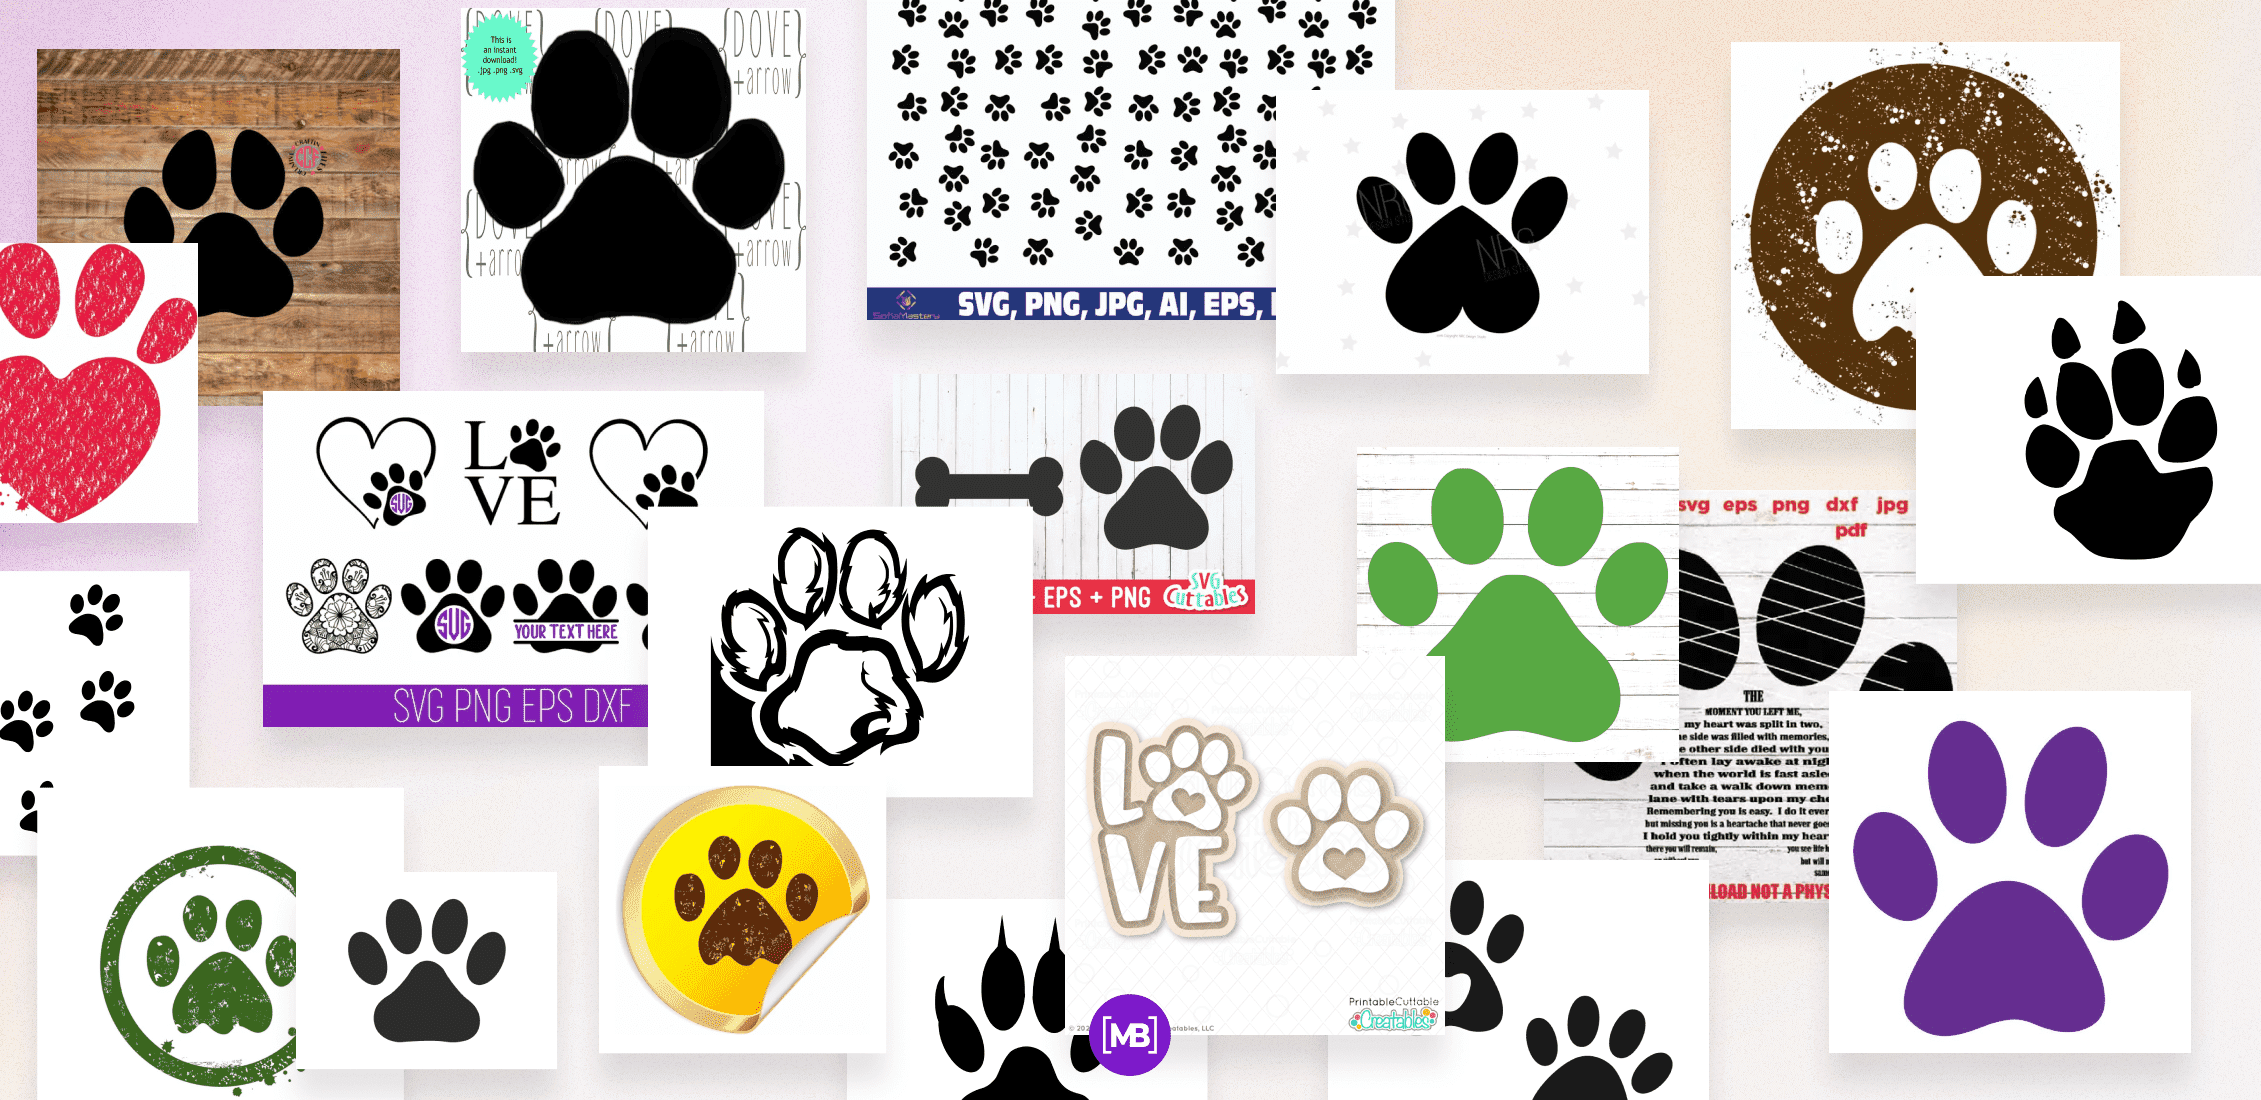 Sunflower With Paw Print Svg Free – Free SVG Cut Files